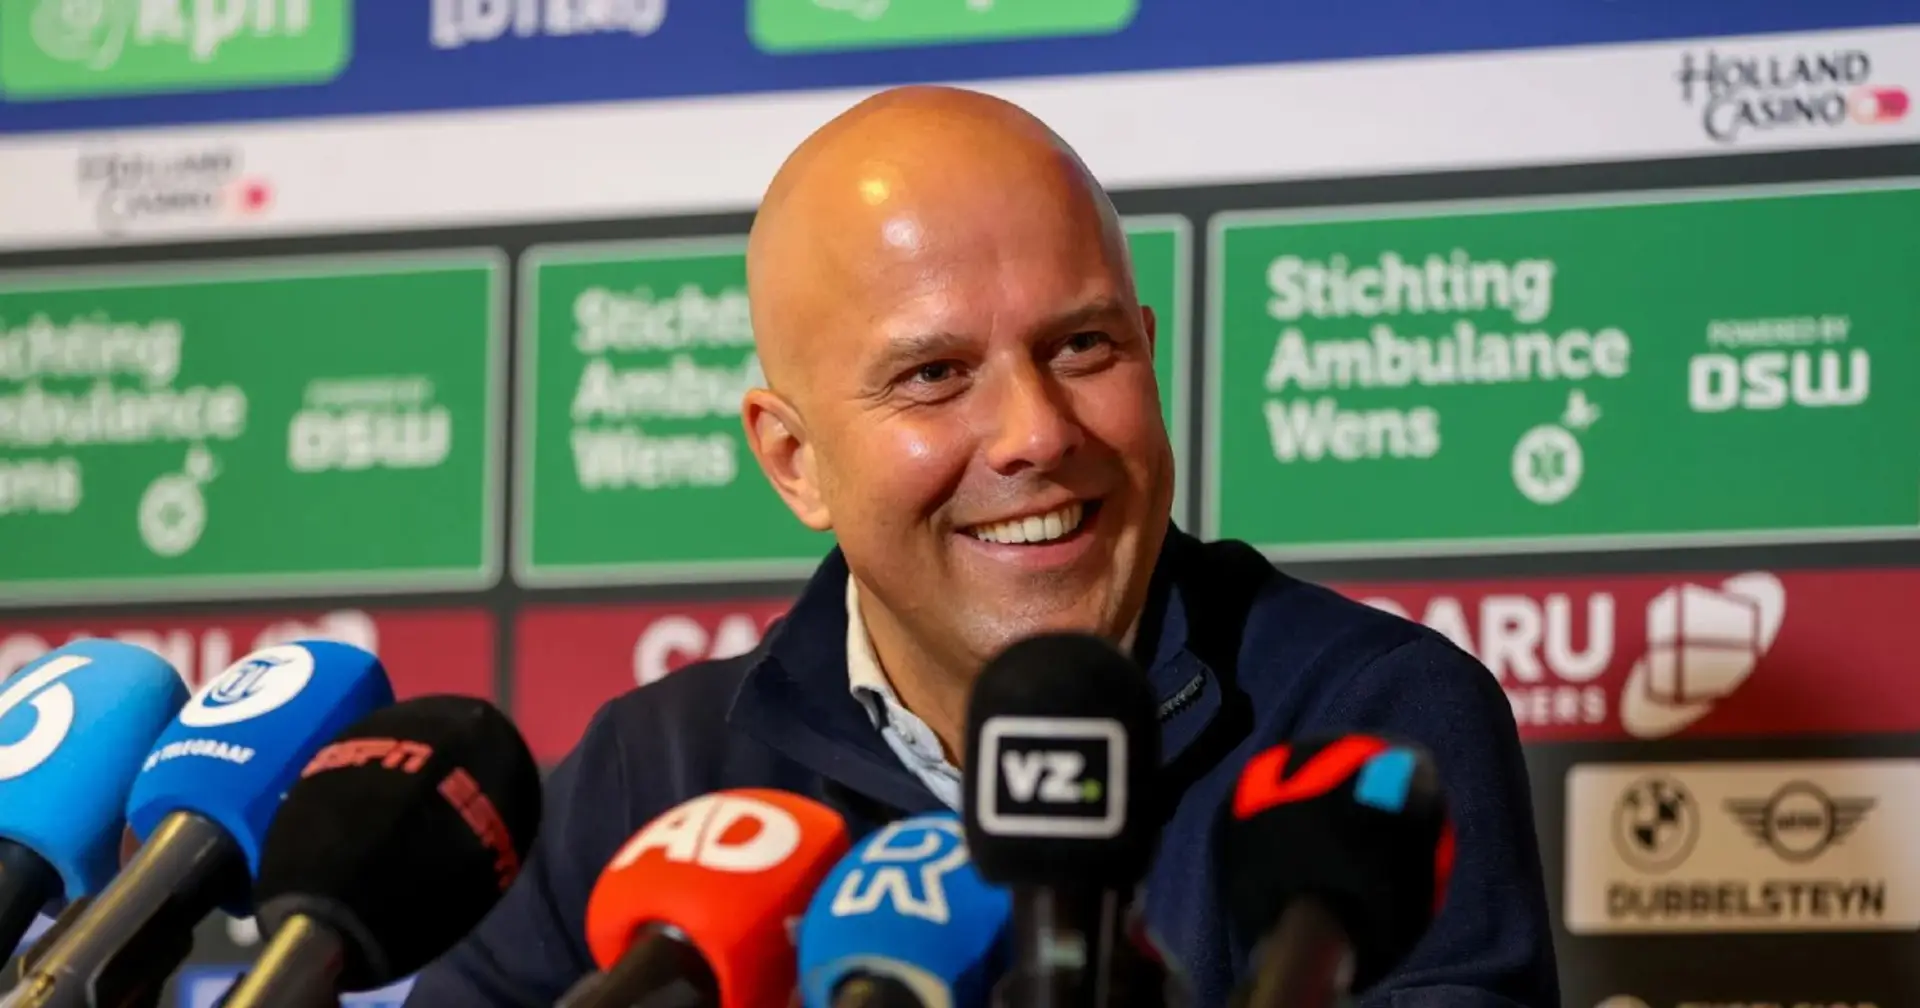 'Humane and thoughtful player management': Feyenoord staff share what Arne Slot is like